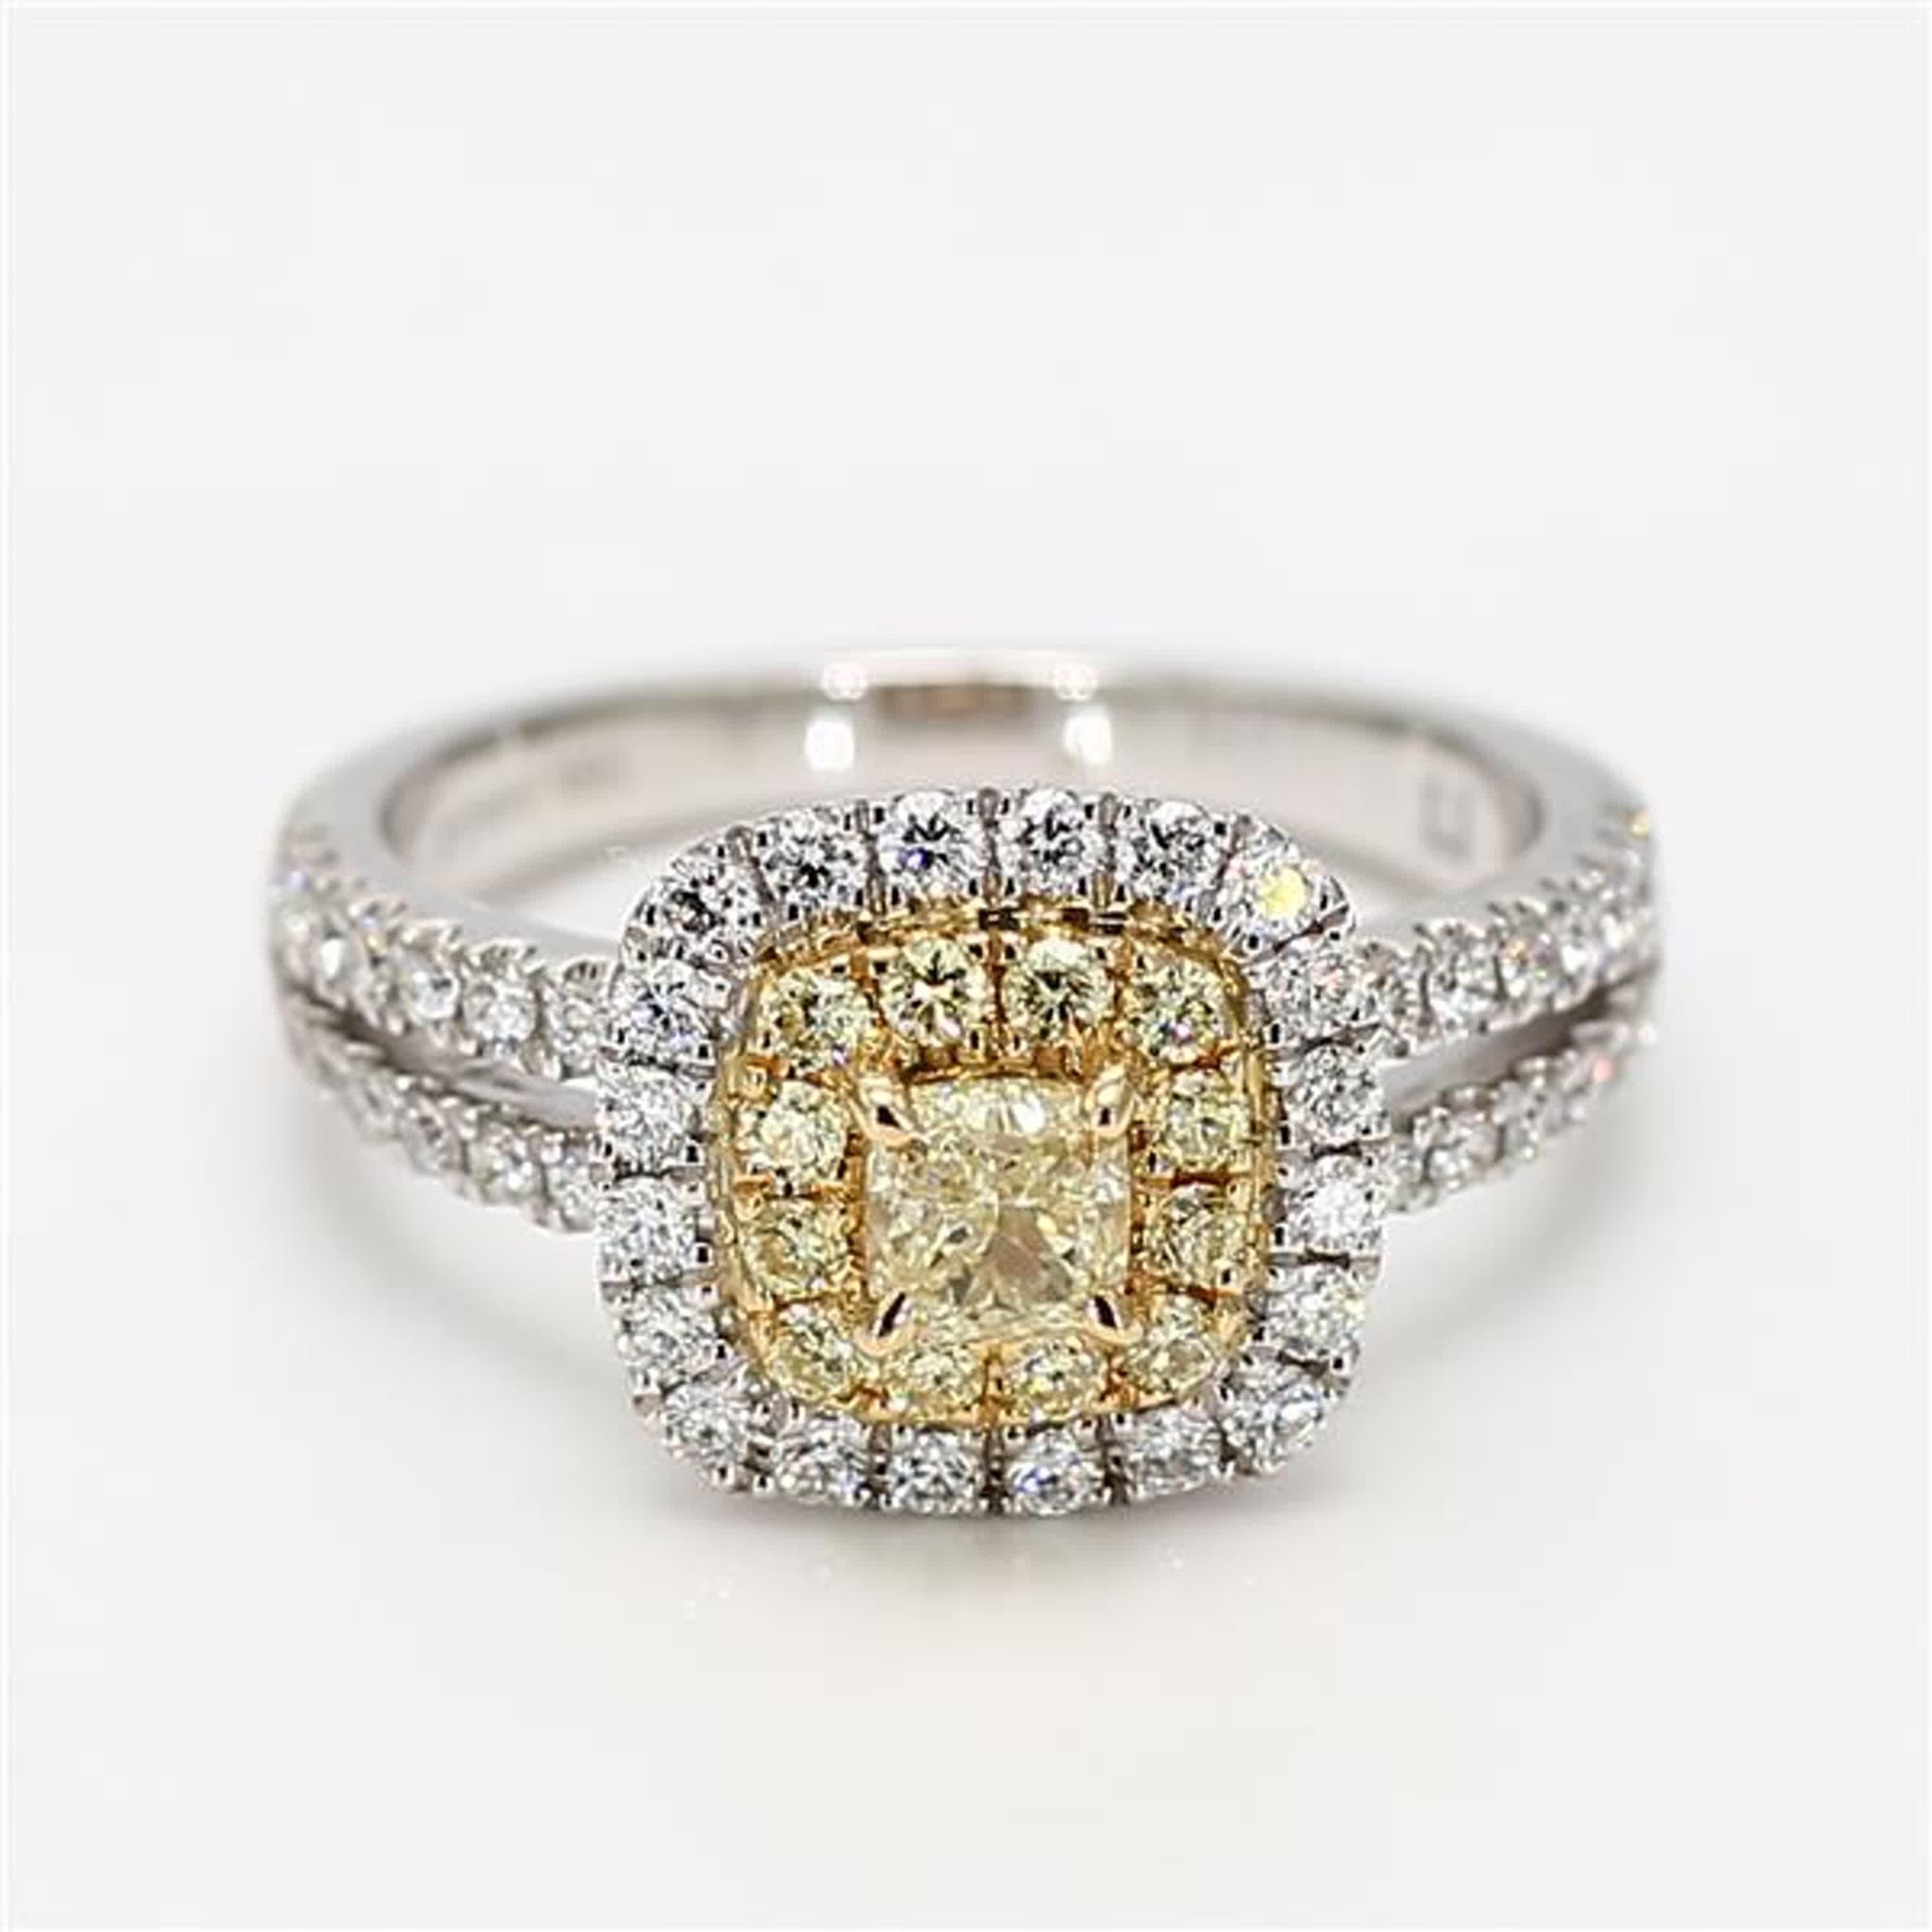 RareGemWorld's classic diamond ring. Mounted in a beautiful 18K Gold and Platinum setting with a natural cushion cut yellow diamond. The yellow diamond is surrounded by small round natural white diamond melee and small round natural yellow diamond